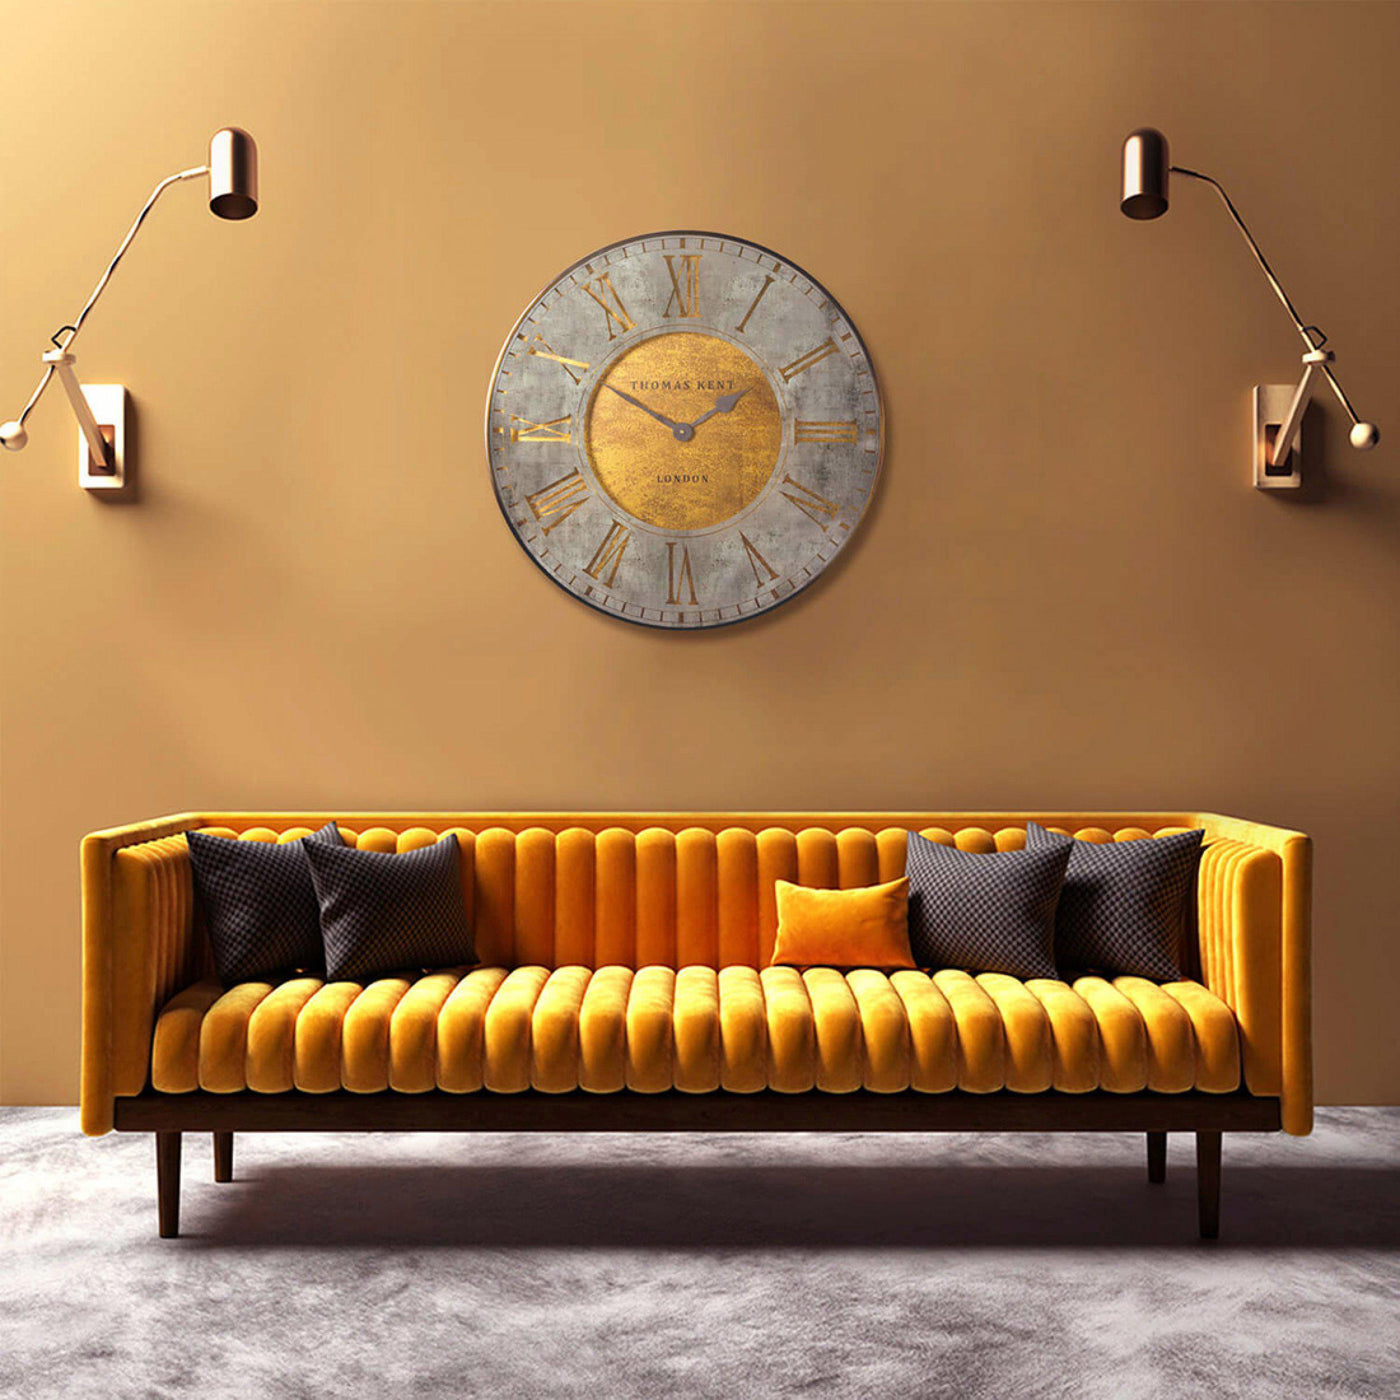 Florentine Star 30" Wall Clock by Thomas Kent Gold - TheArtistsQuarter